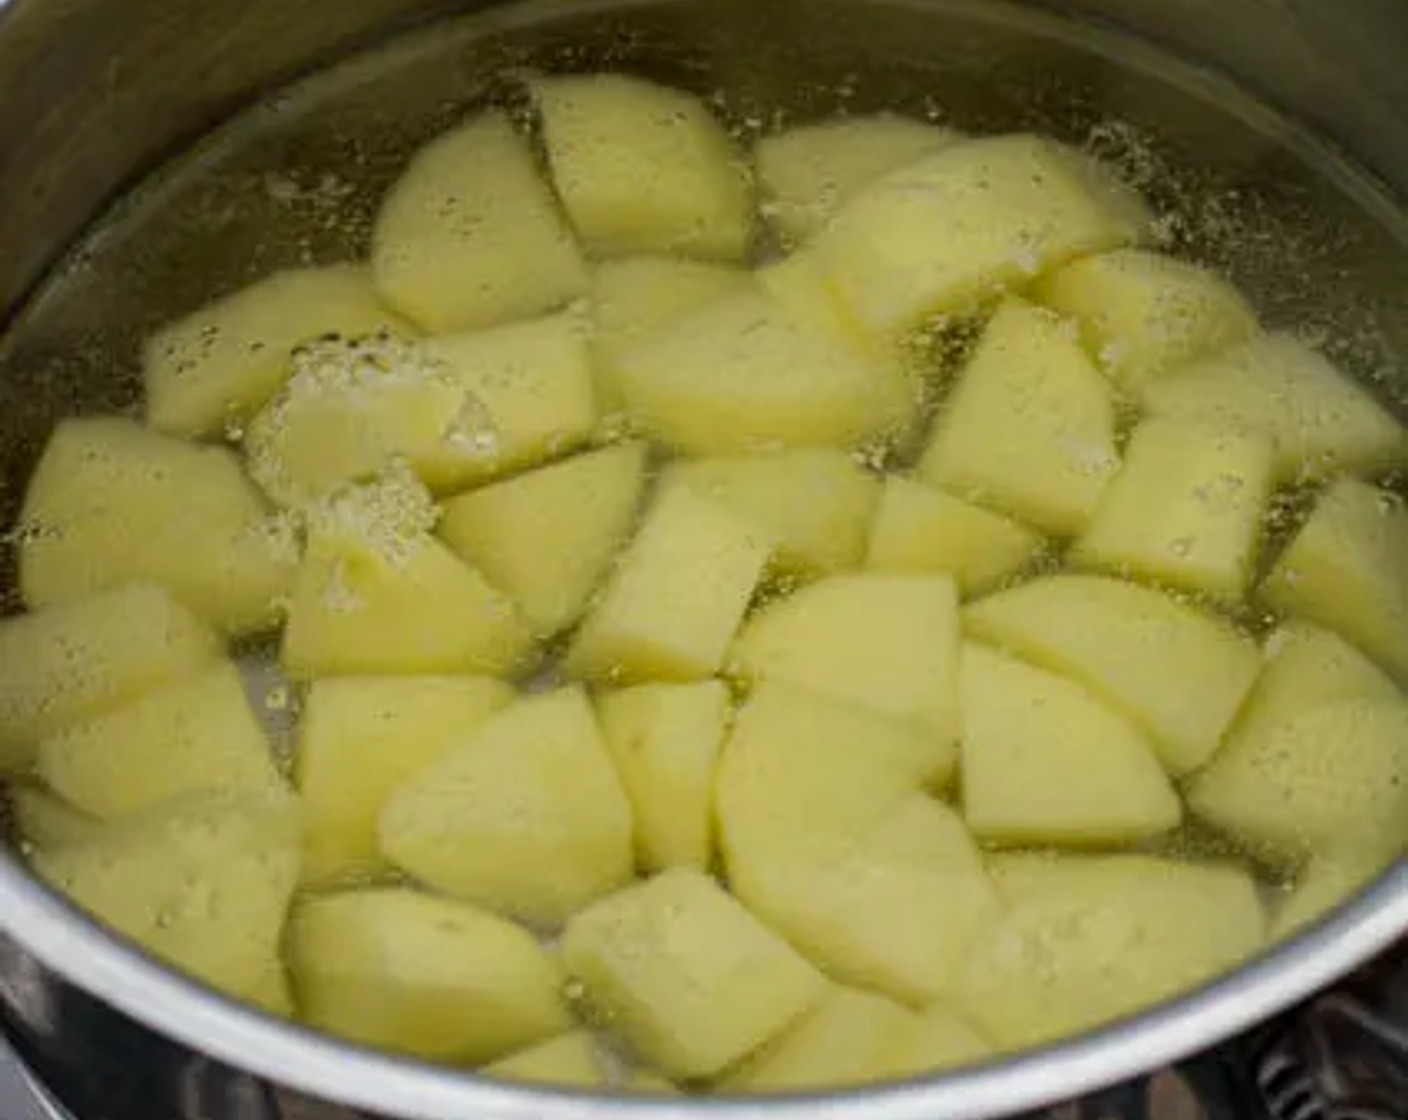 step 1 Boil the Yukon Gold Potatoes (2) in water for 10 minutes or until soft. Drain the water and set the potatoes aside.